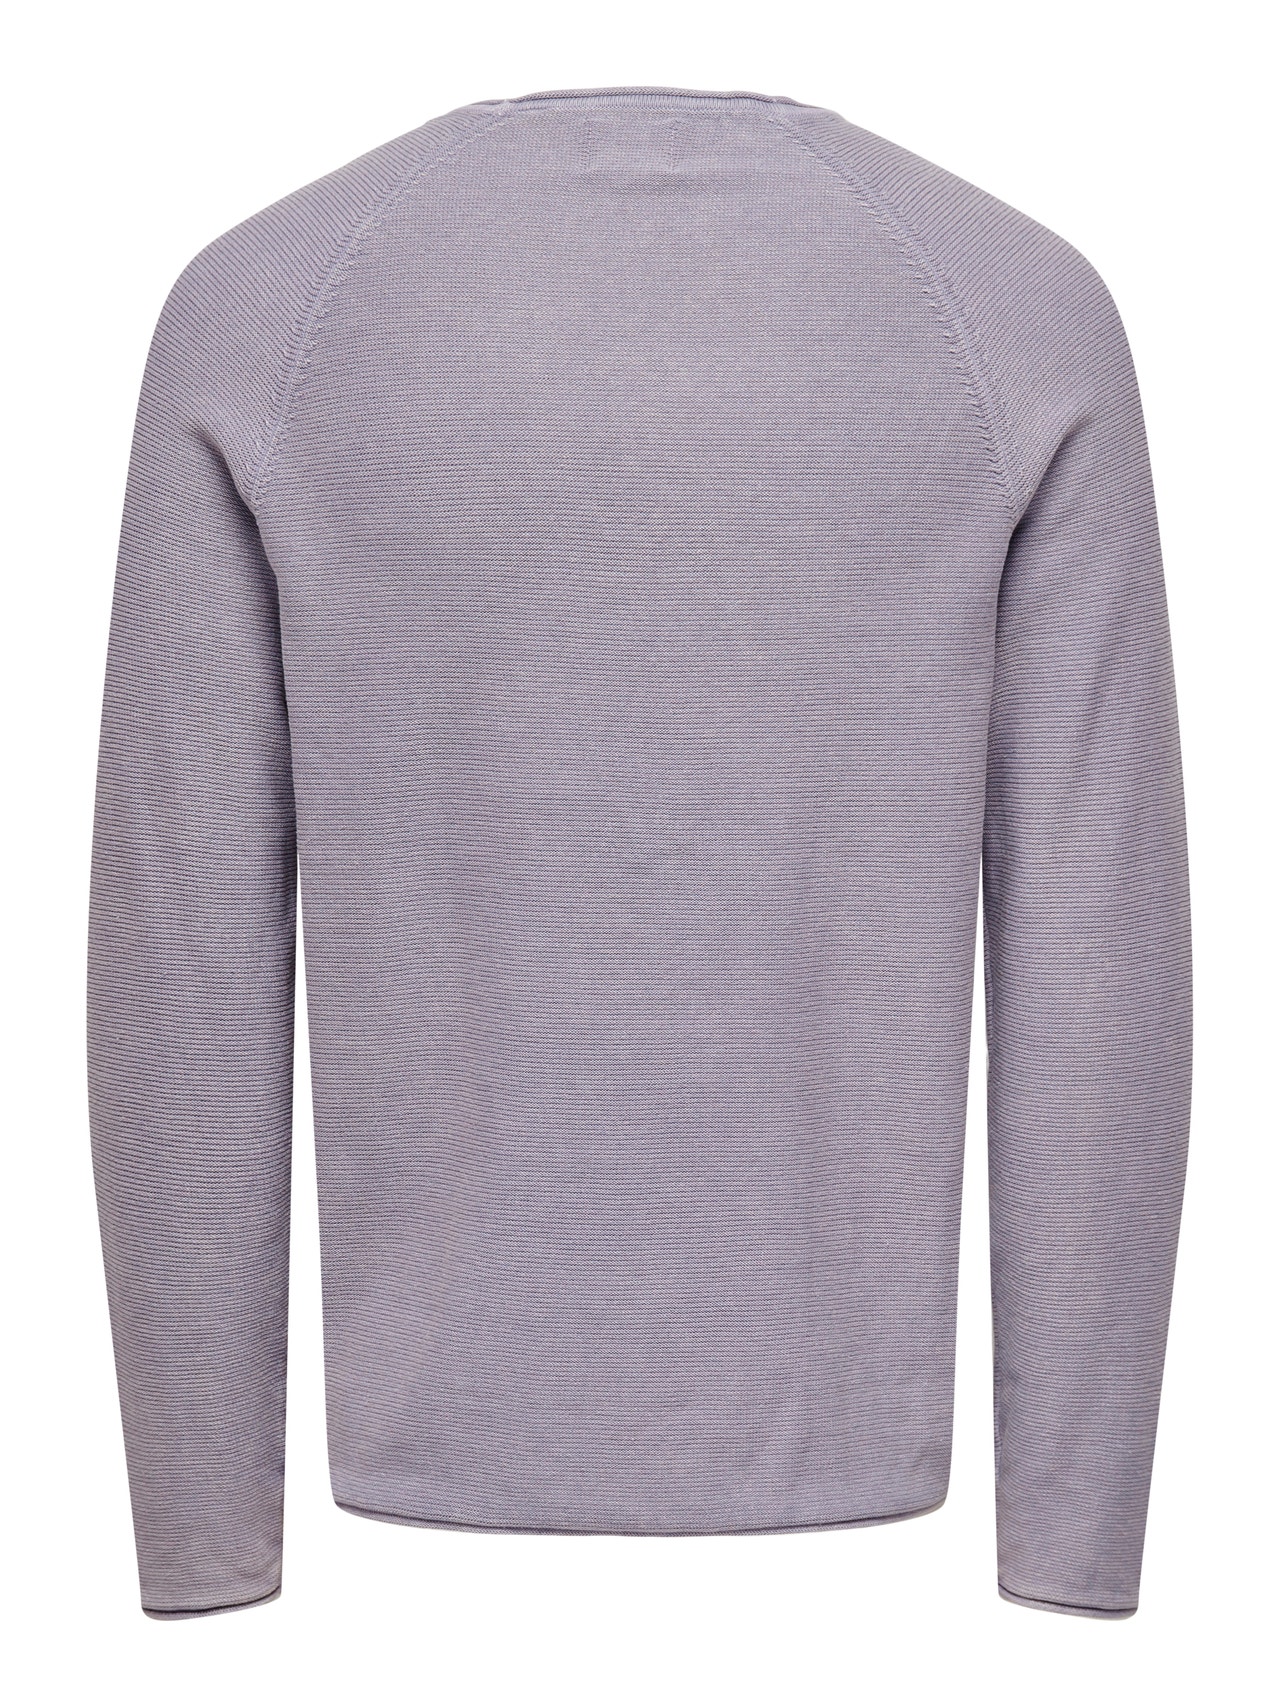 ONLY & SONS Solid color knitted pullover -Purple Ash - 22016131